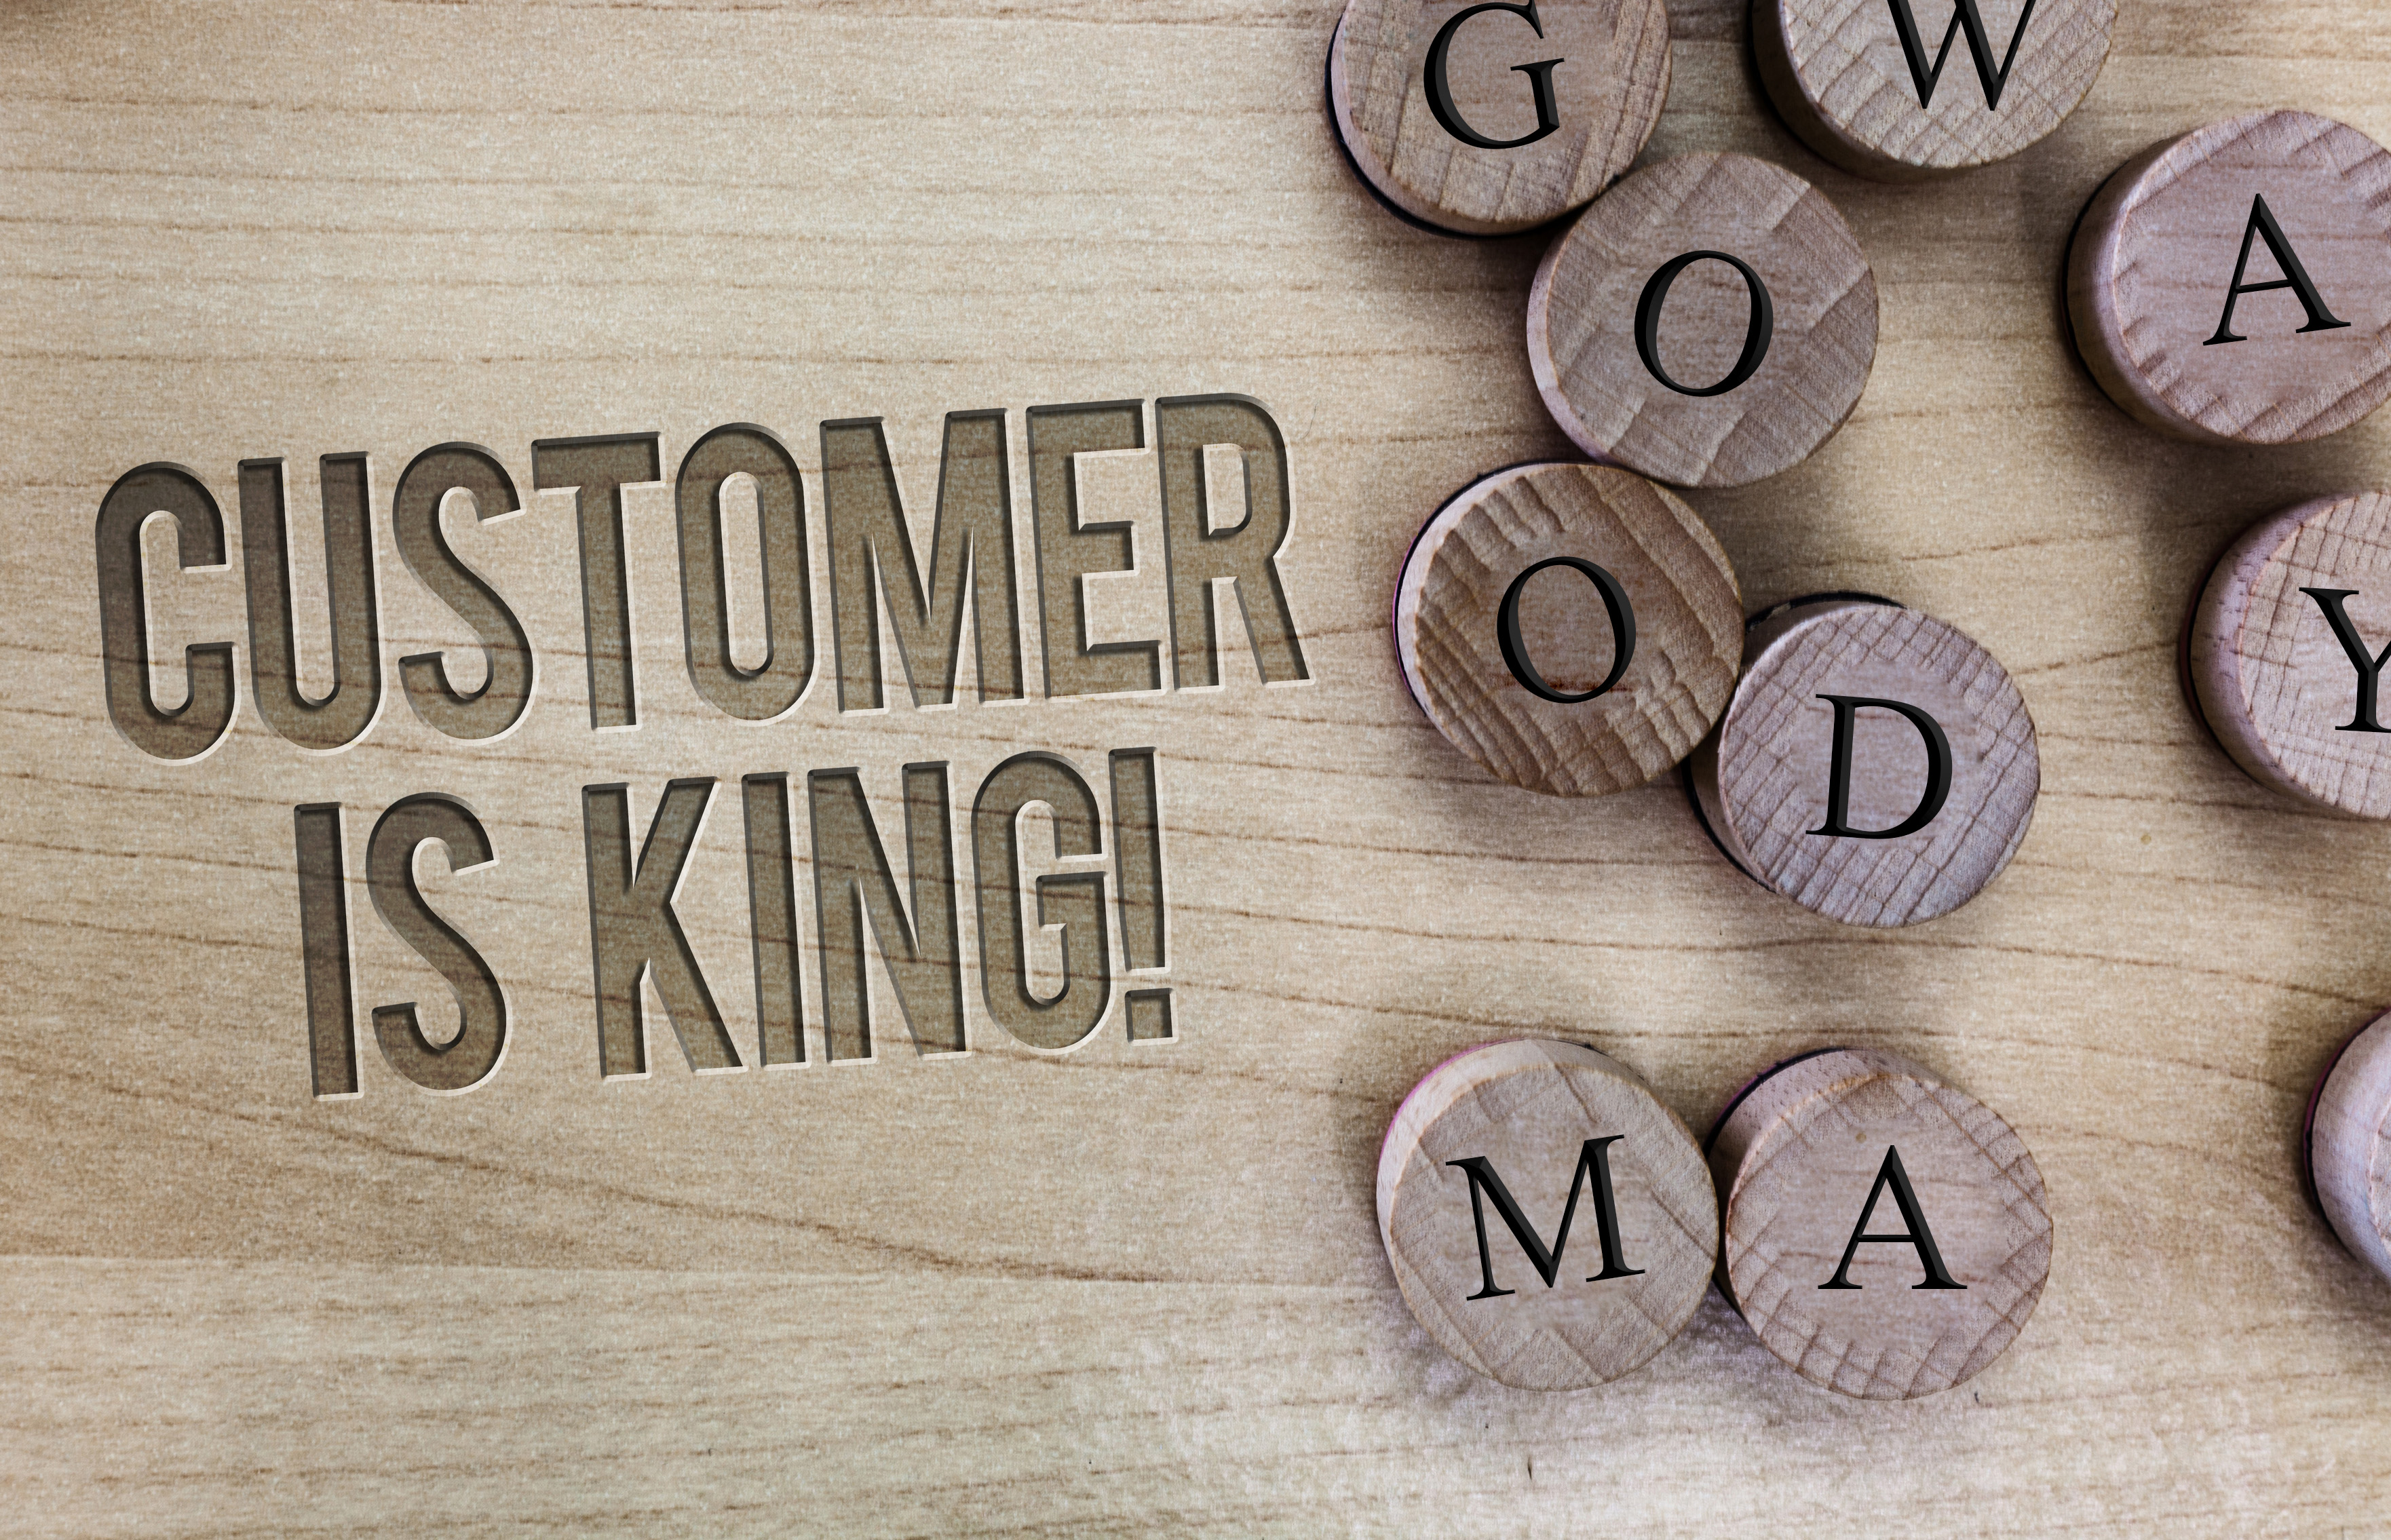 customer is the king essay